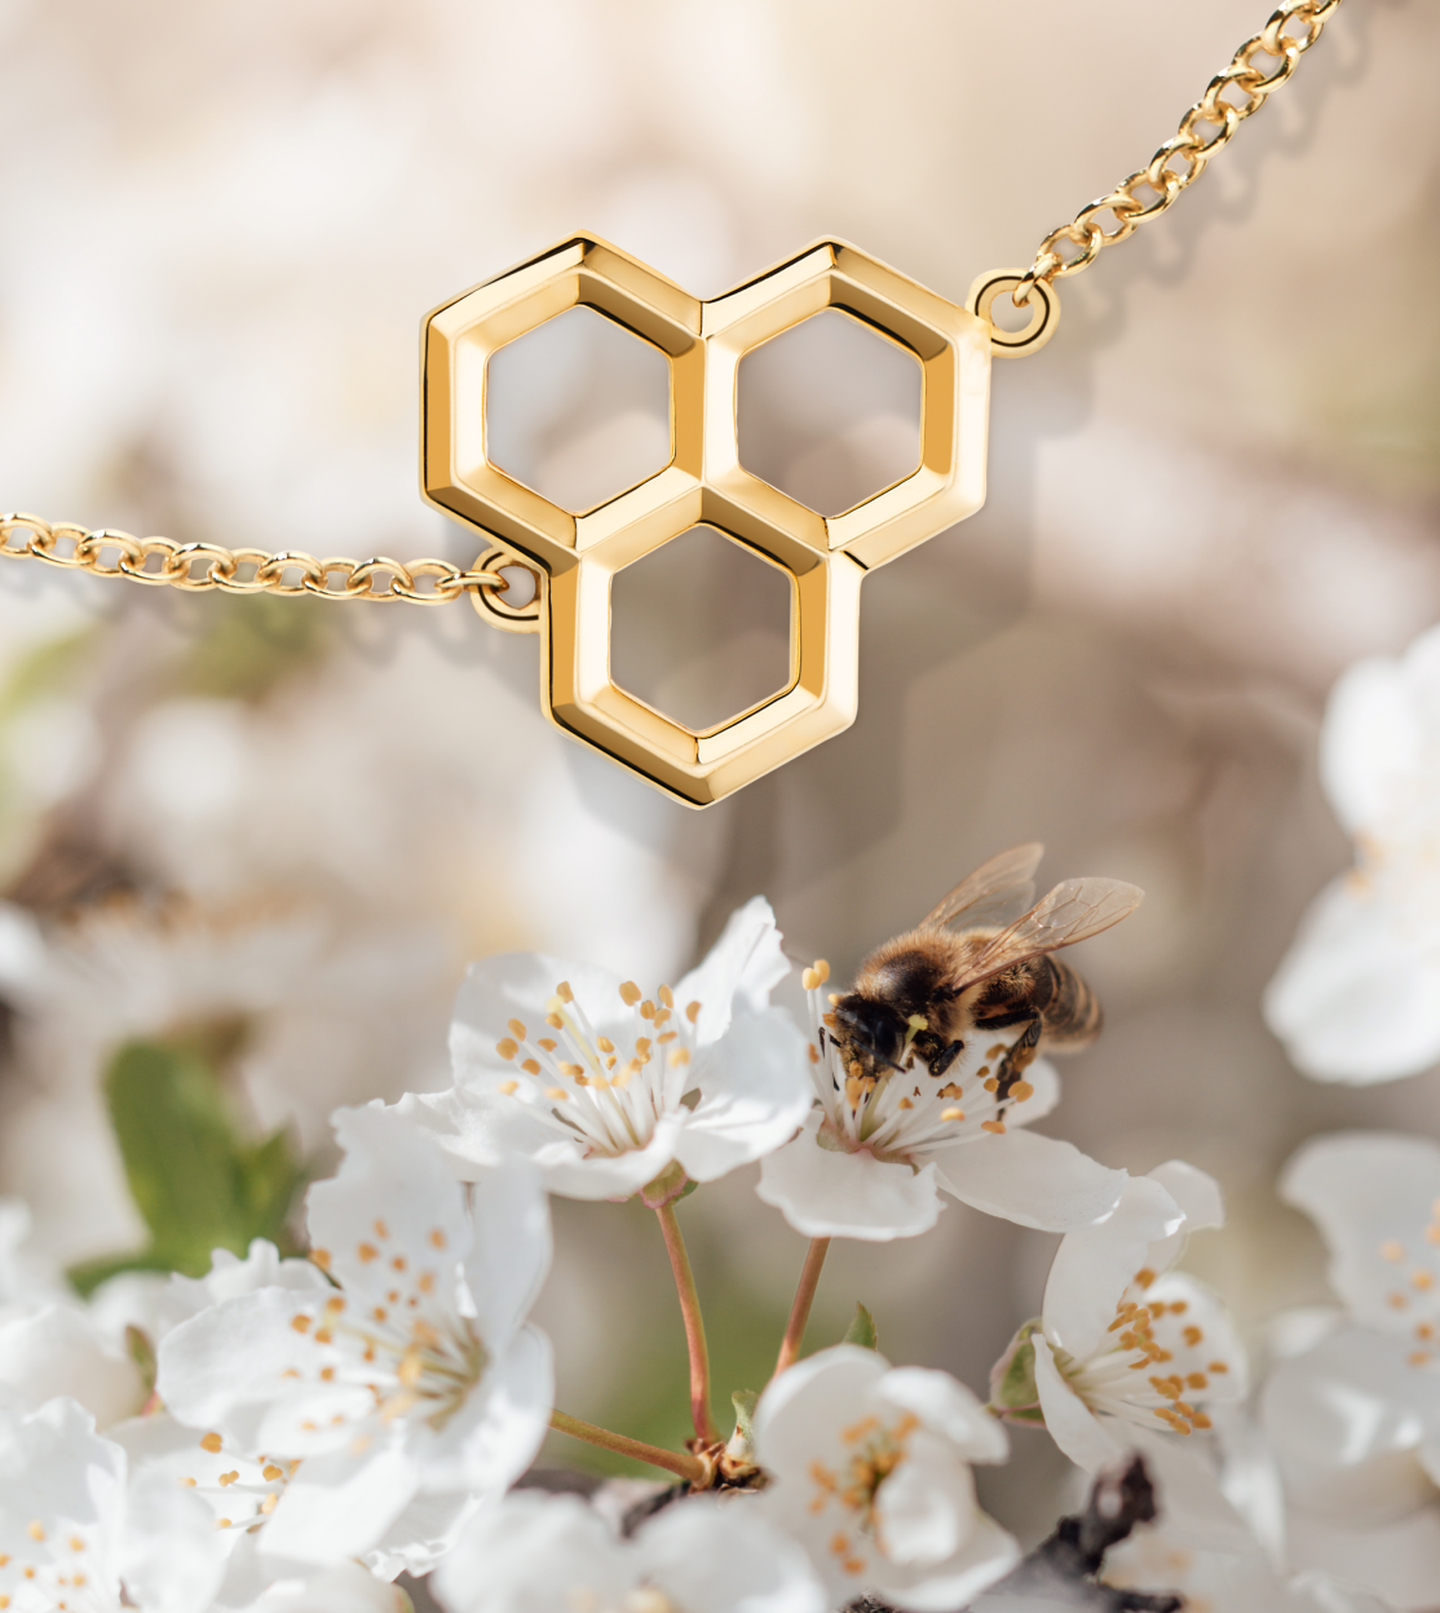 Gold jewelry in front of a bee gathering pollen from a white flower.